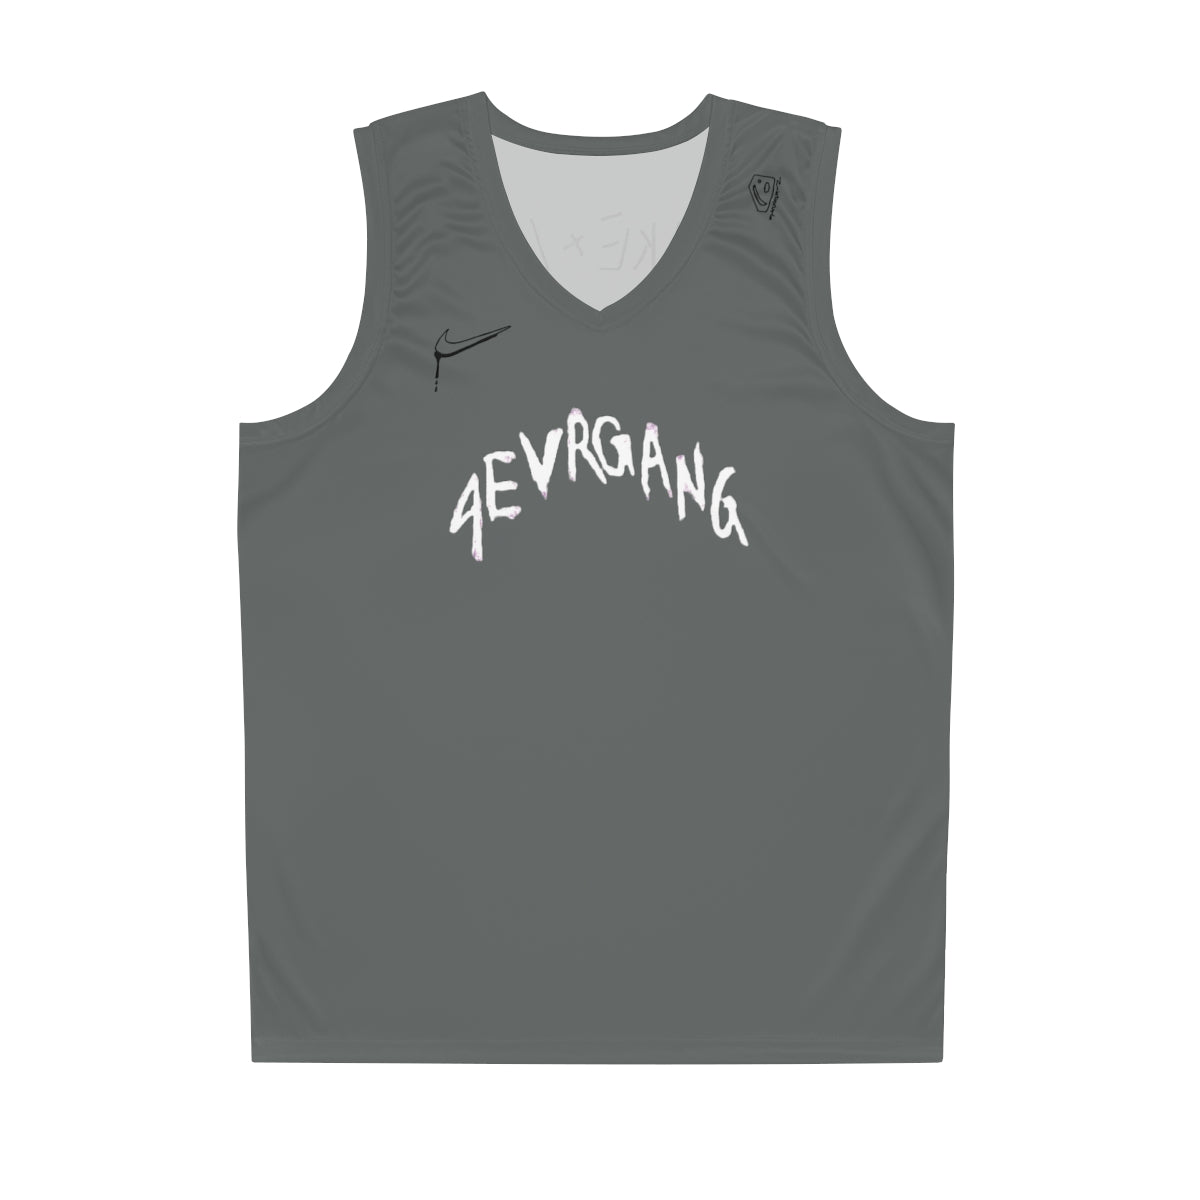 4EVR GANG [JERSEY]